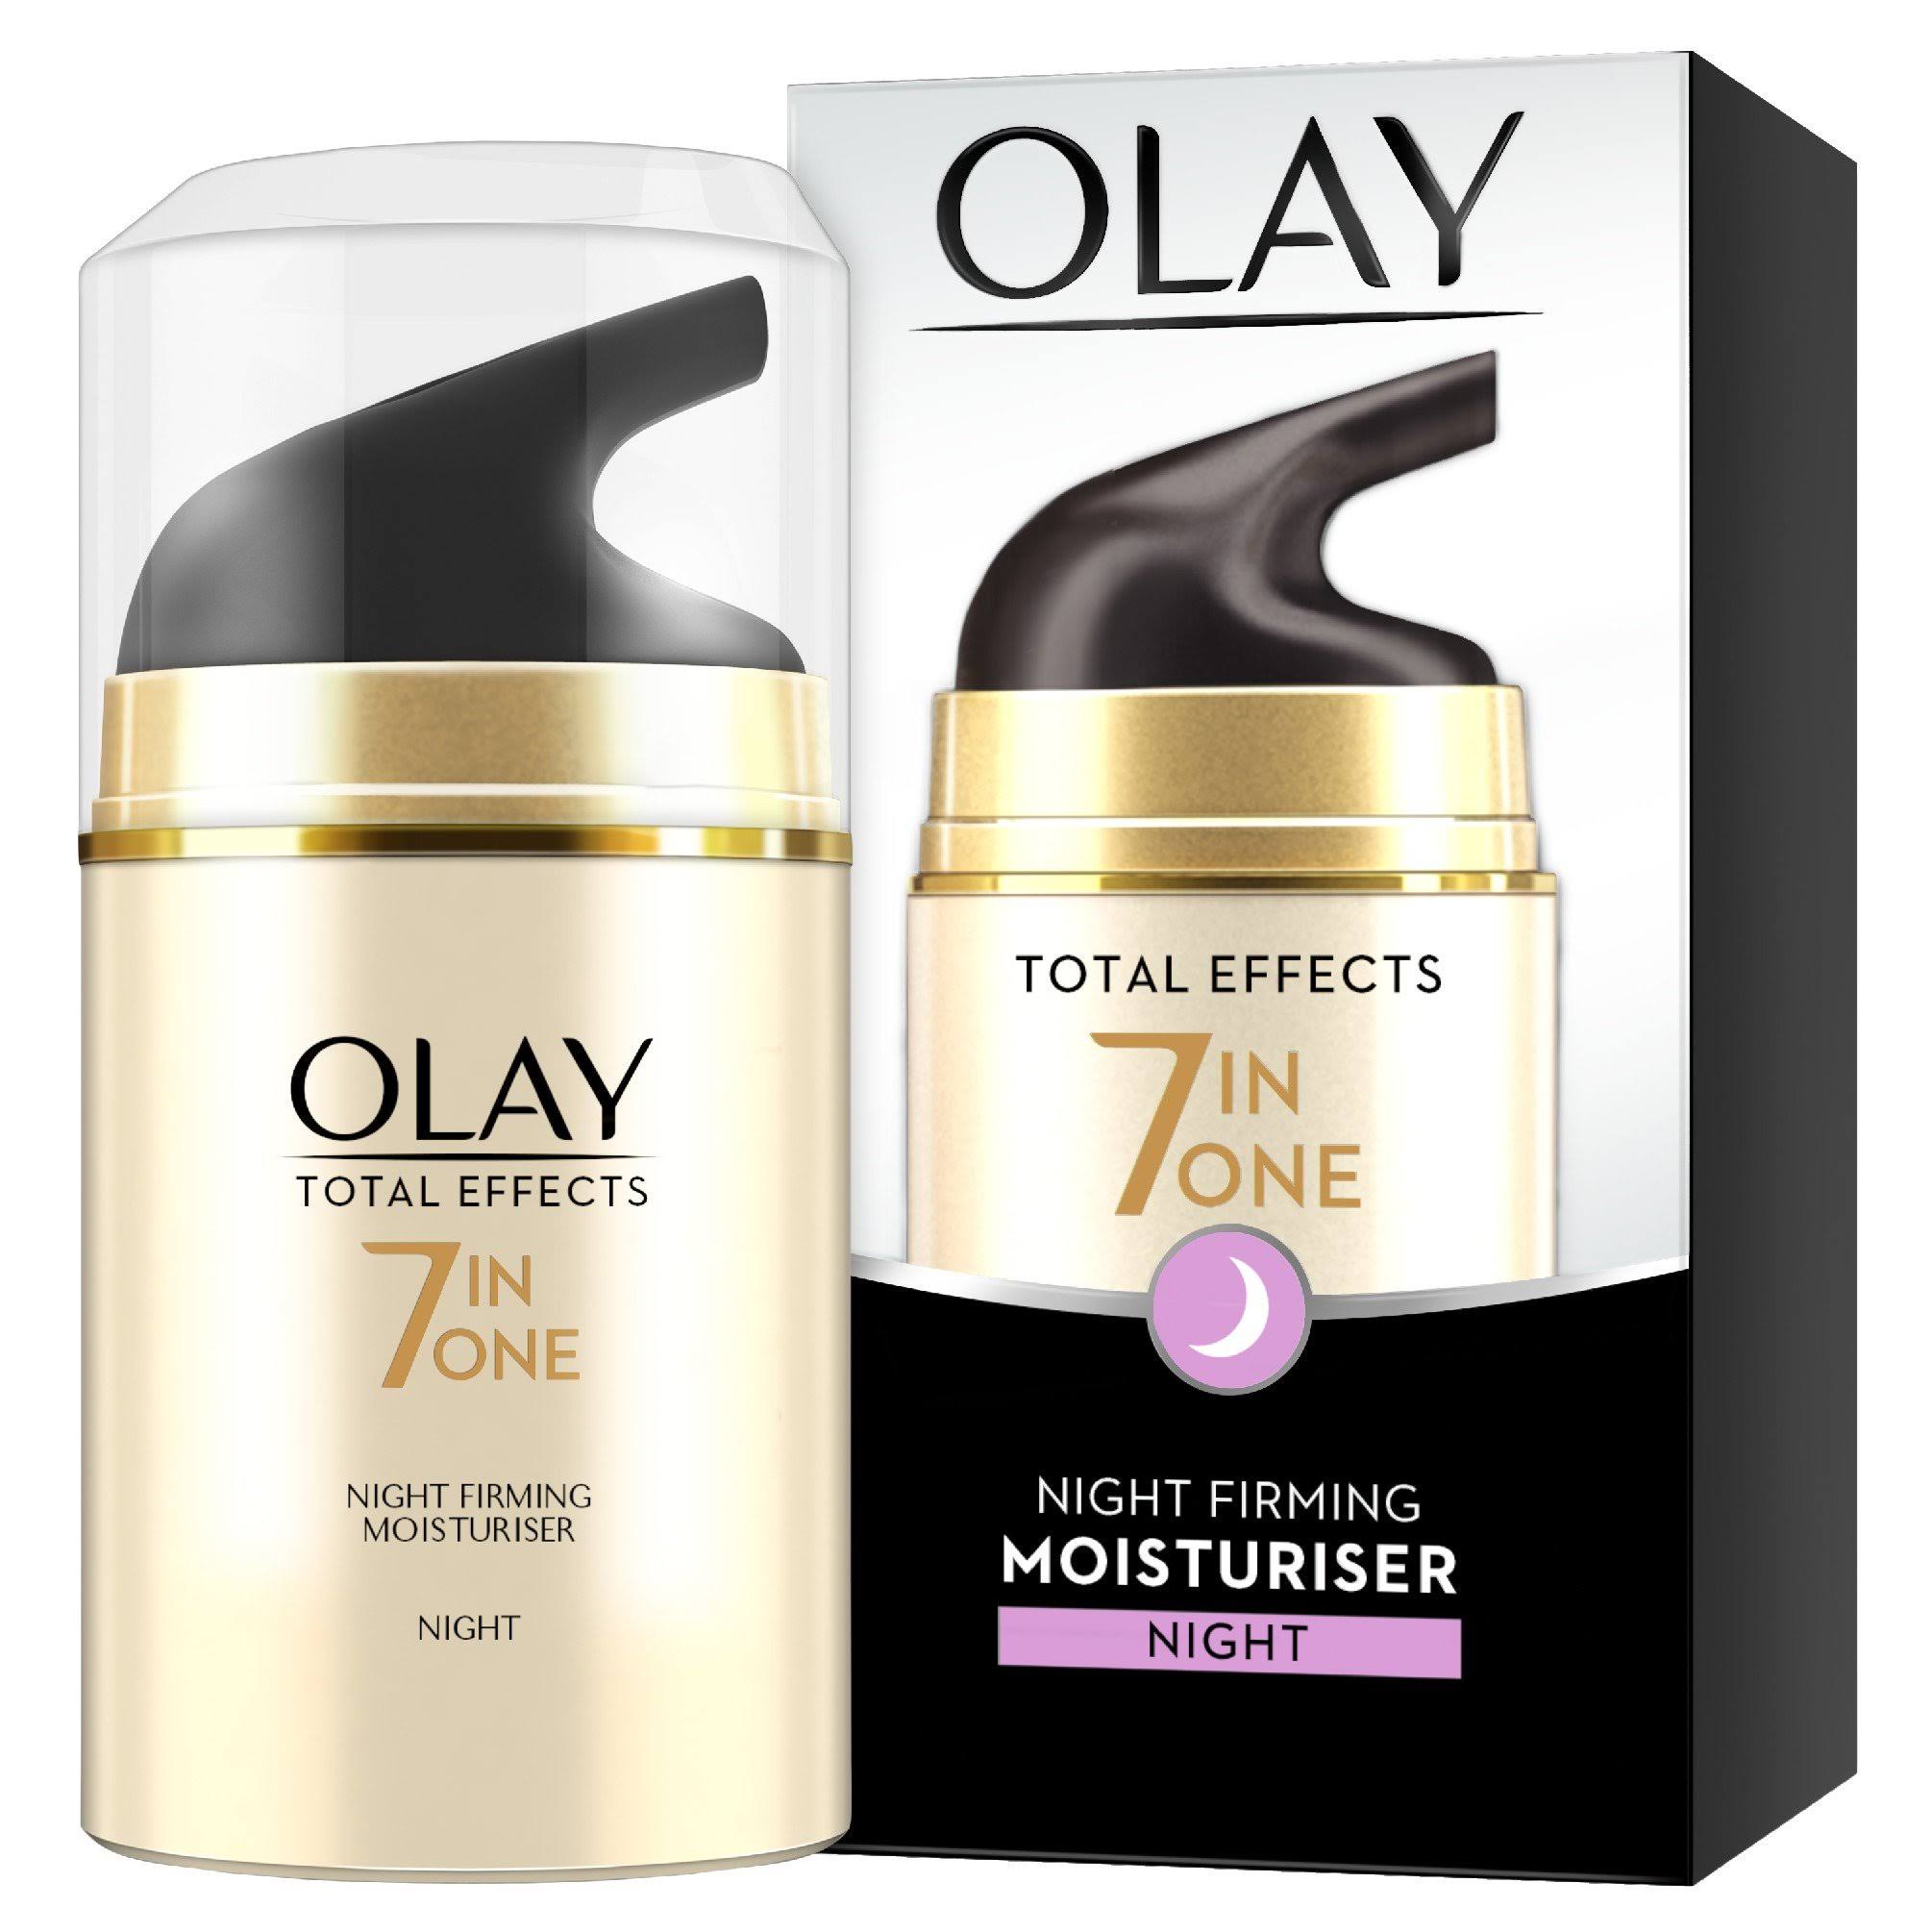 Olay Total Effects Anti-Ageing 7 in 1 Night Firming Moisturiser - 50ml